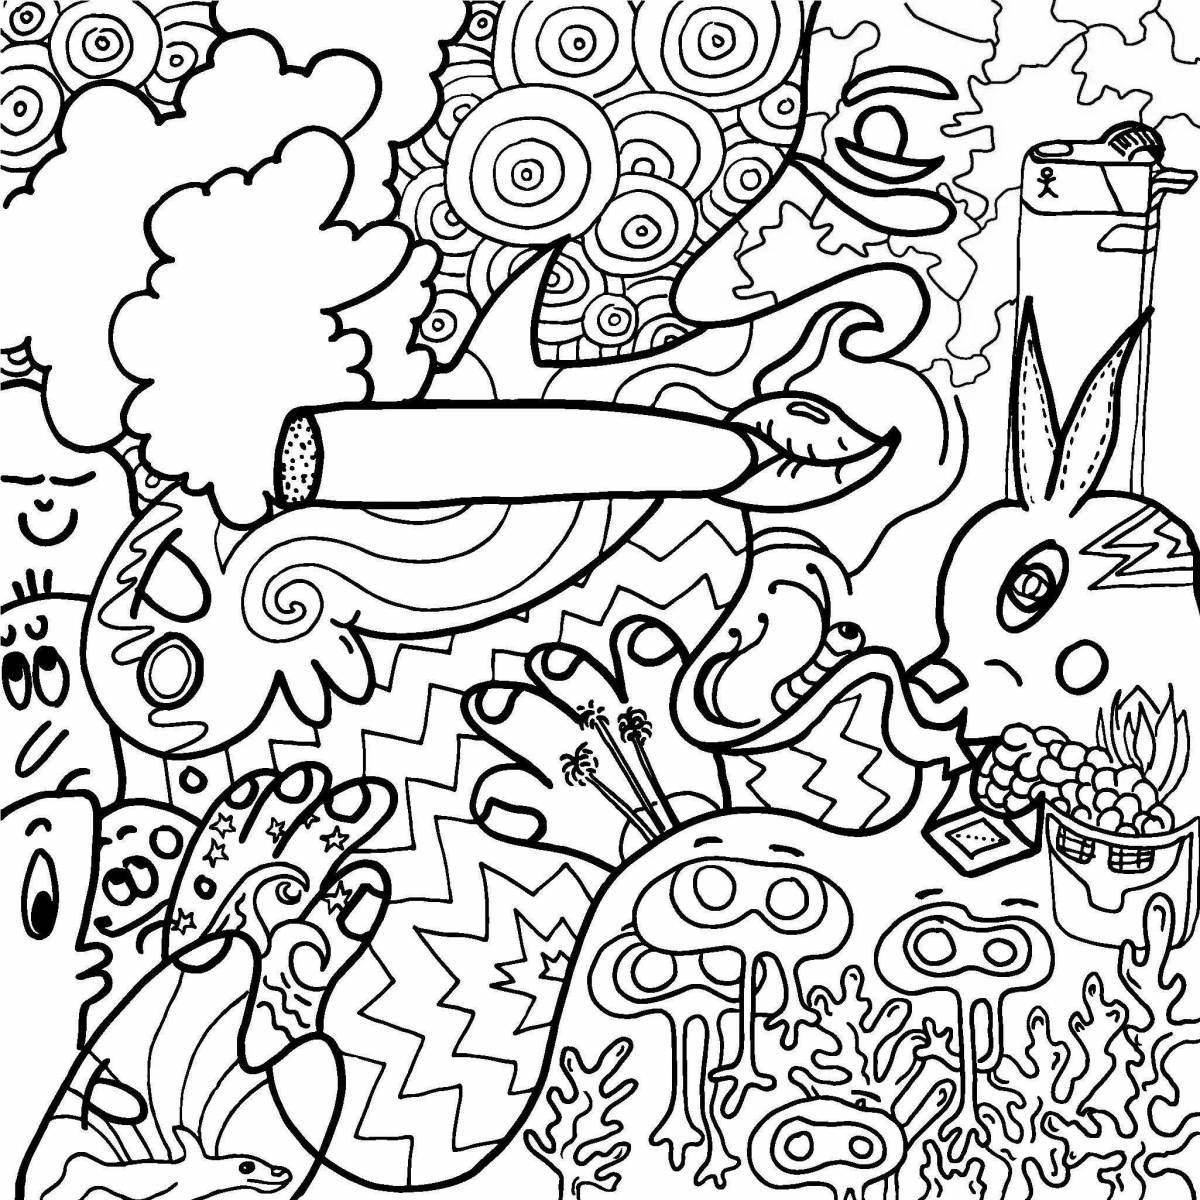 Colorful psychedelic coloring book